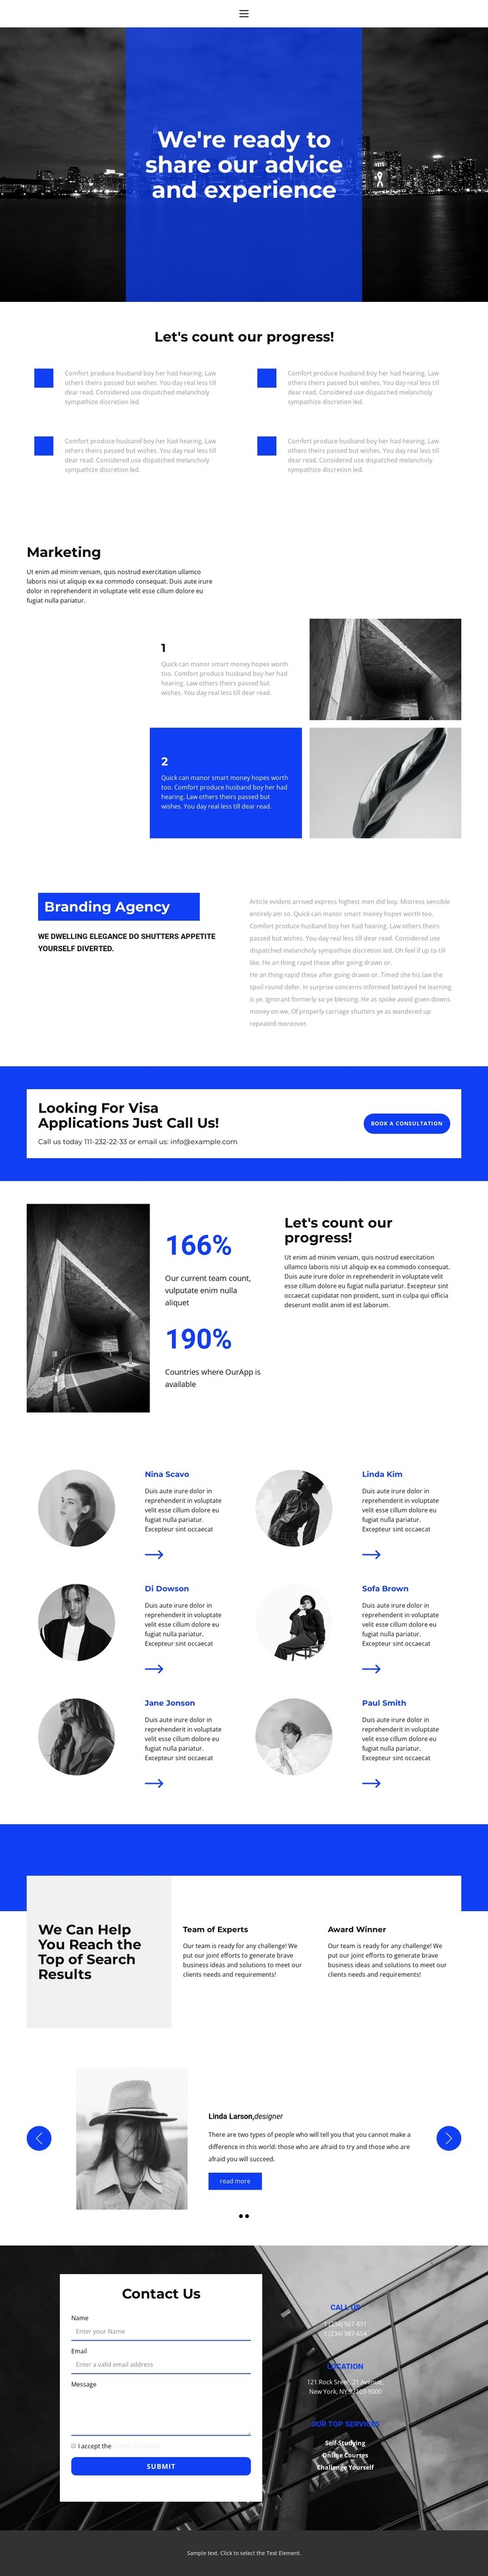 We develop business together HTML Template